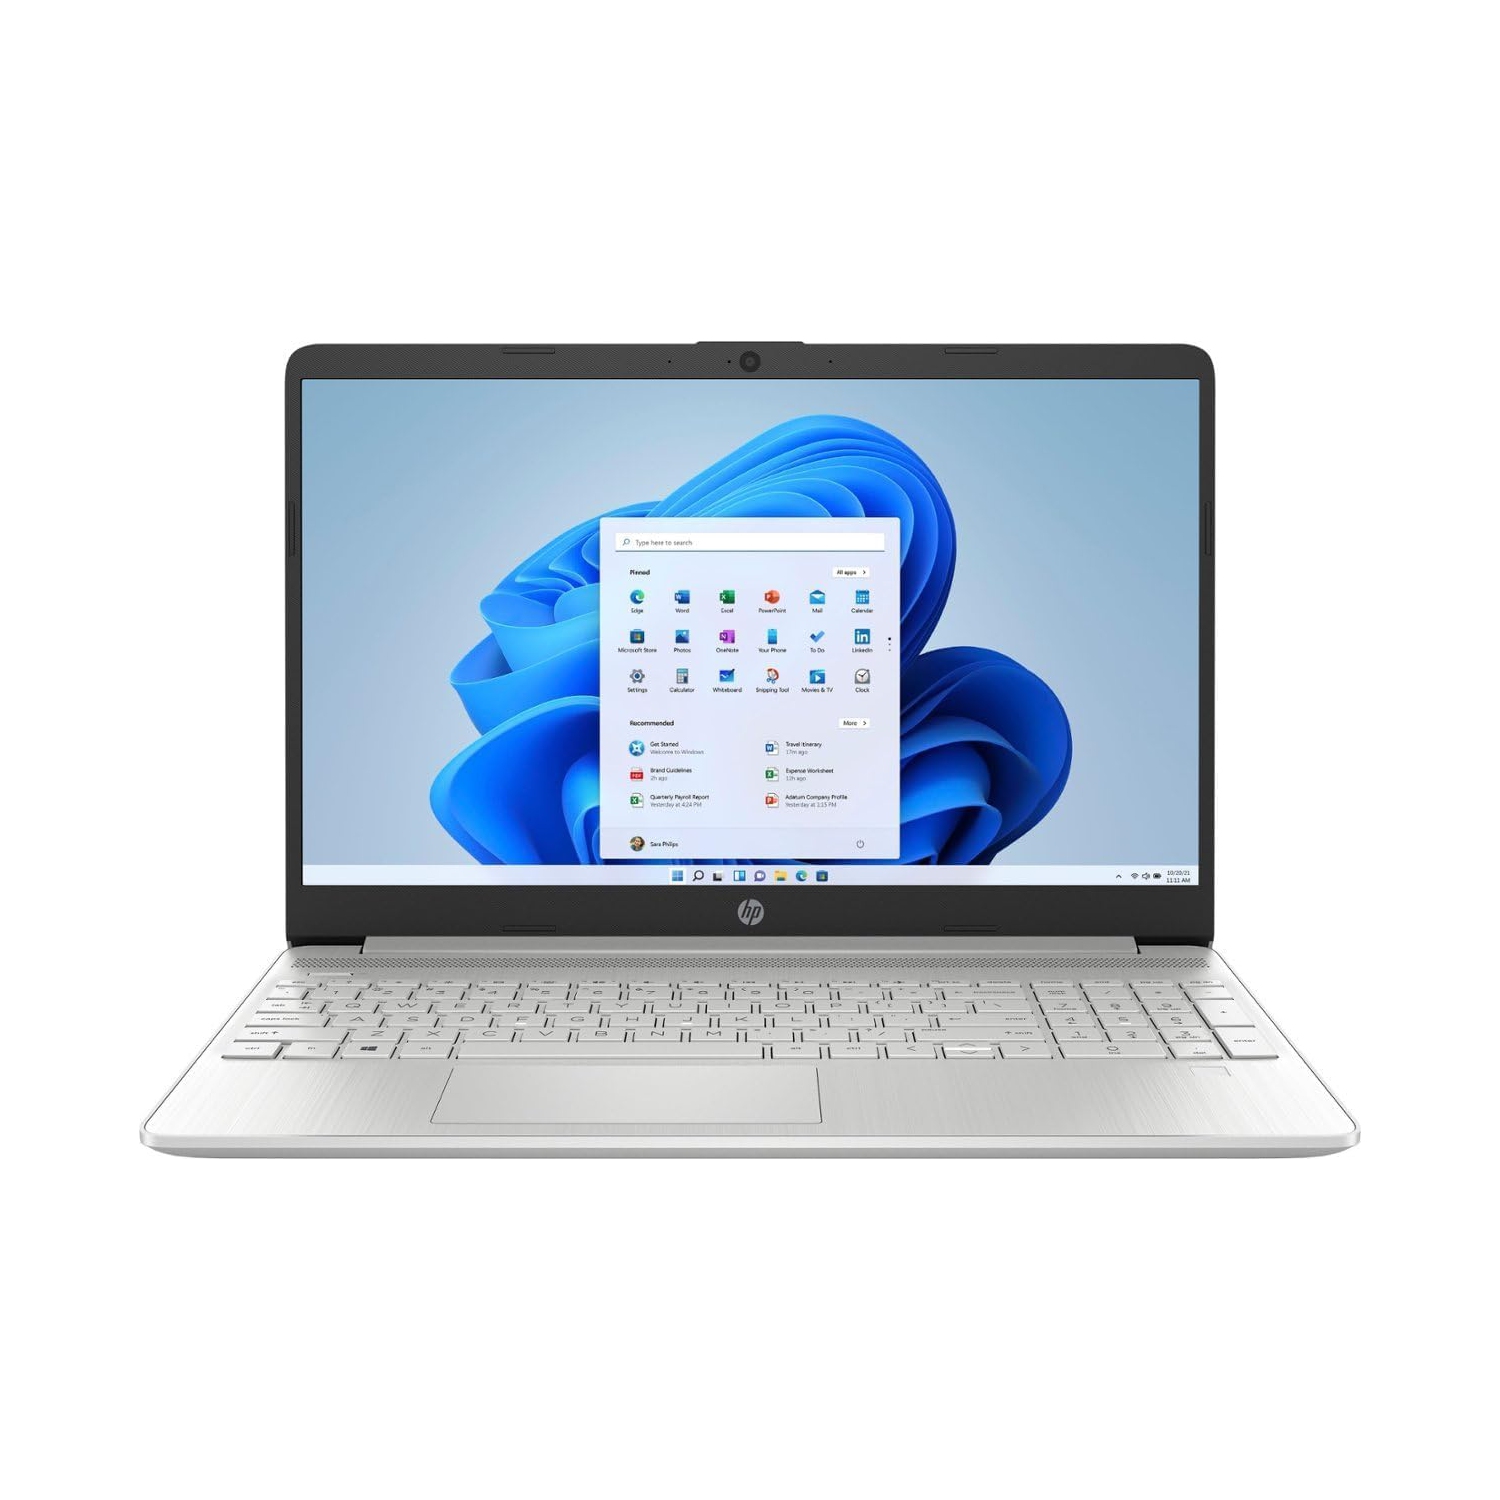 HP - 15.6" FHD 1920 x 1080 Touch-Screen Laptop - Intel Core 6-Core i3 -1215u Up to 4.4GHz - 16GB Memory - 256GB SSD - Natural Silver, Intel UHD Graphics, Windows 11 Home